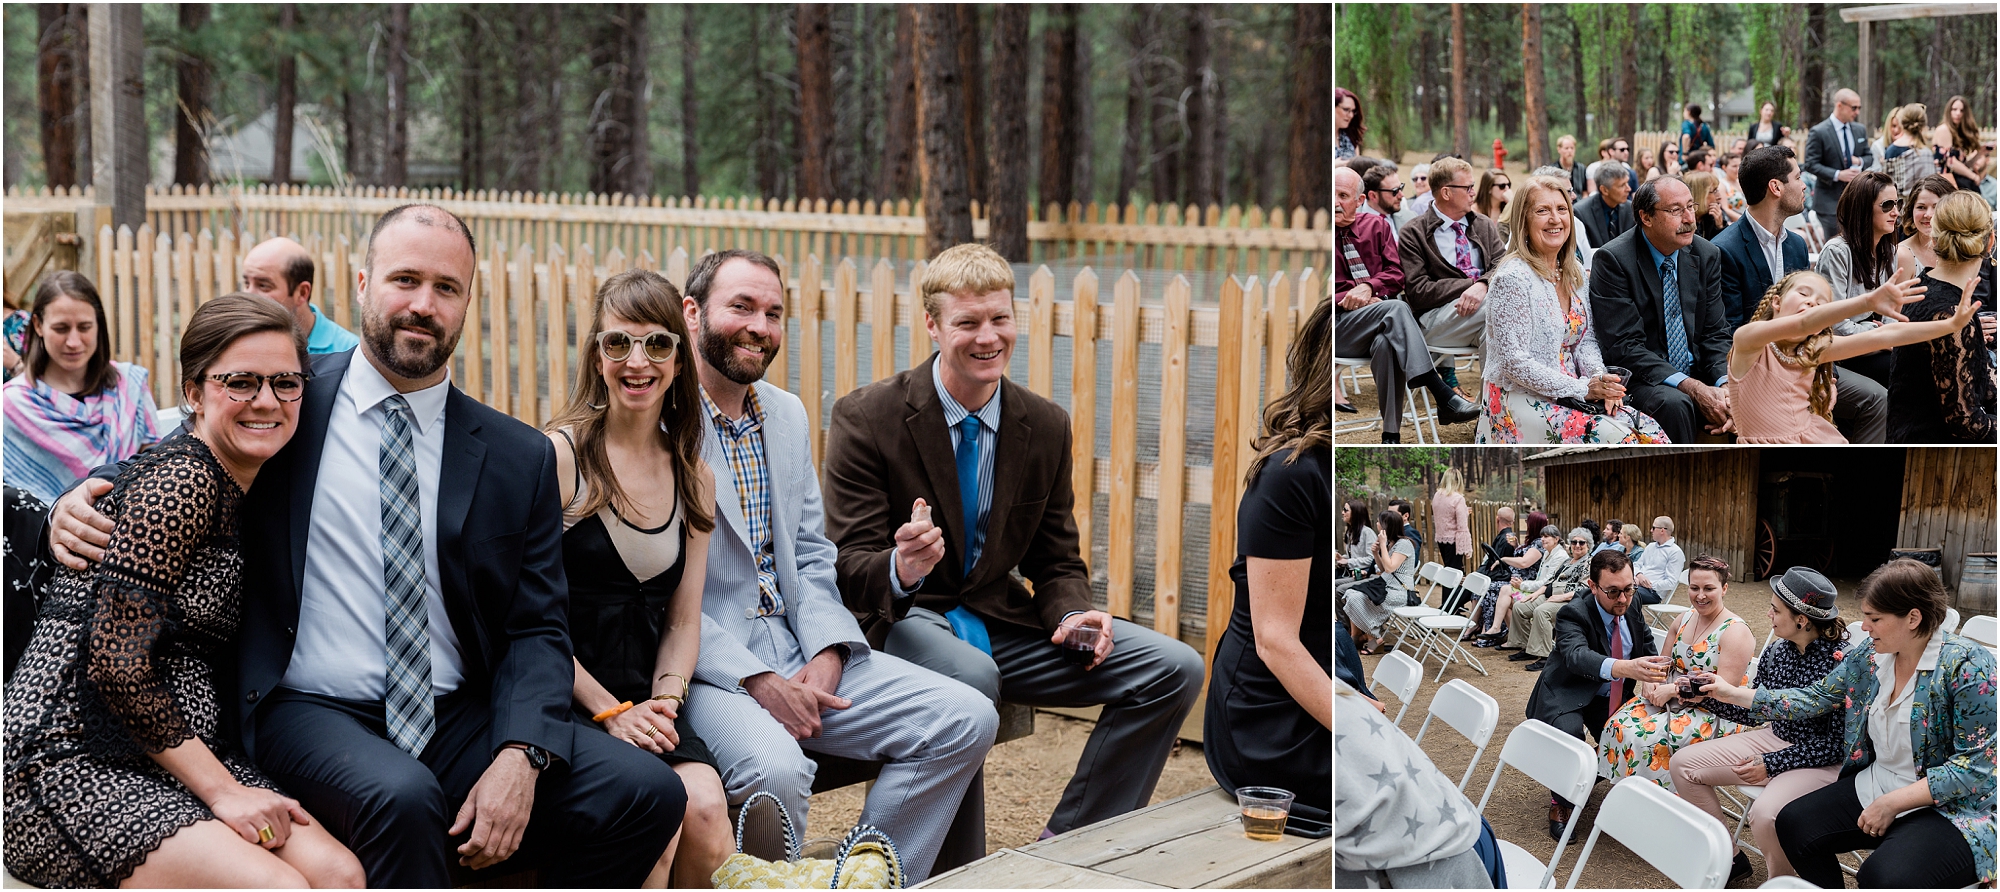 Guests are seated and ready for the spring outdoor wedding ceremony situated at the High Desert Museum Homestead in Bend, OR. | Erica Swantek Photography